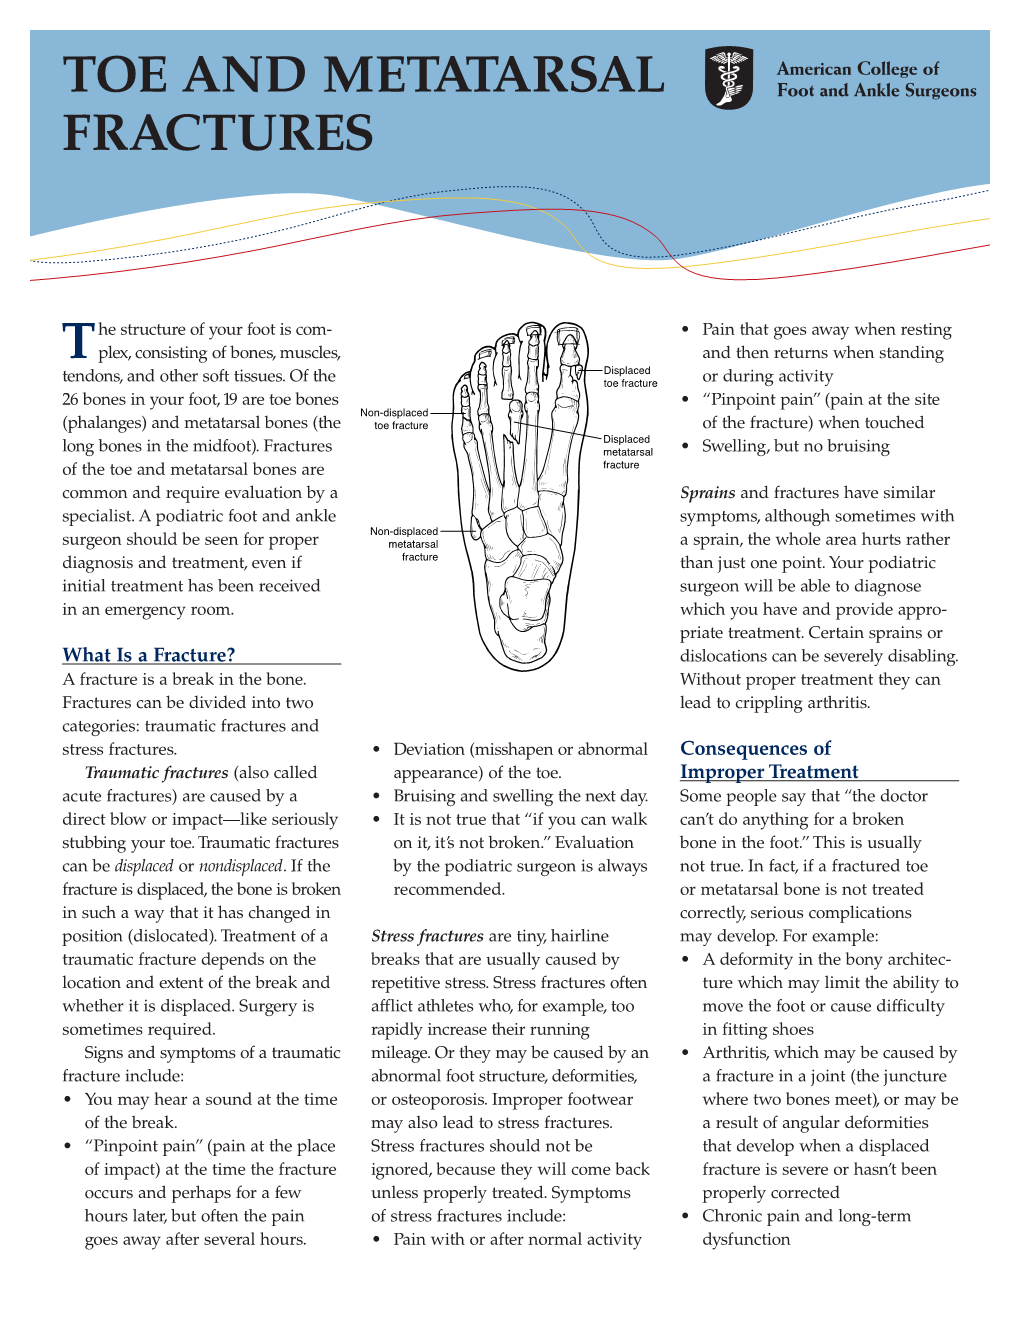 Toe and Metatarsal Fractures